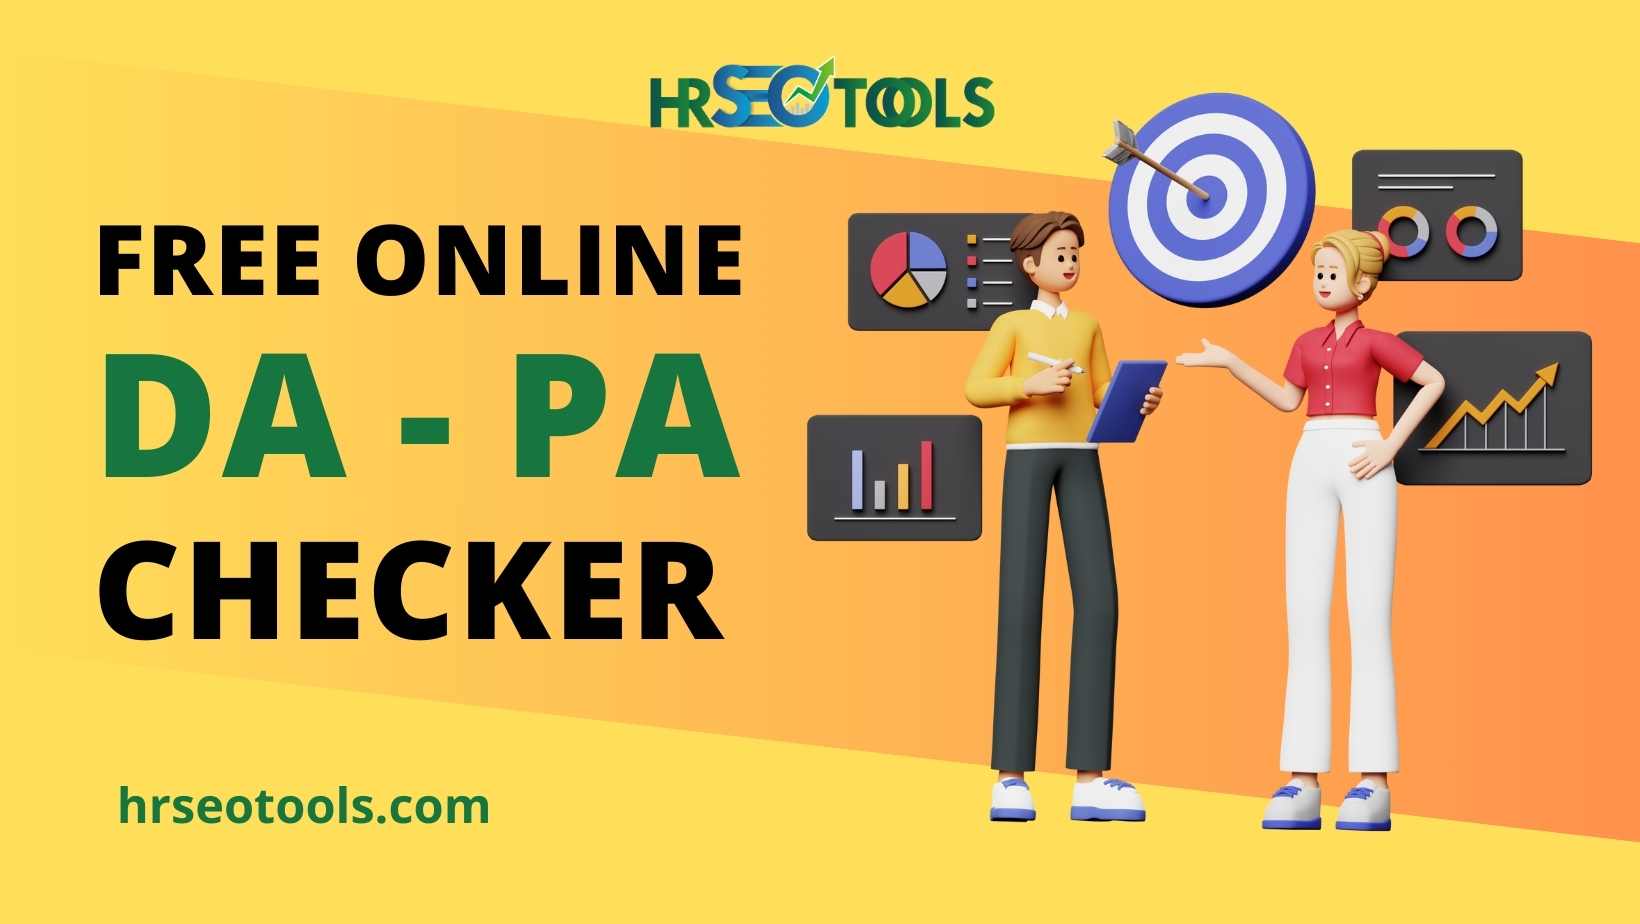 How to Increase Your Website's Domain Authority (DA) with DA PA Checker